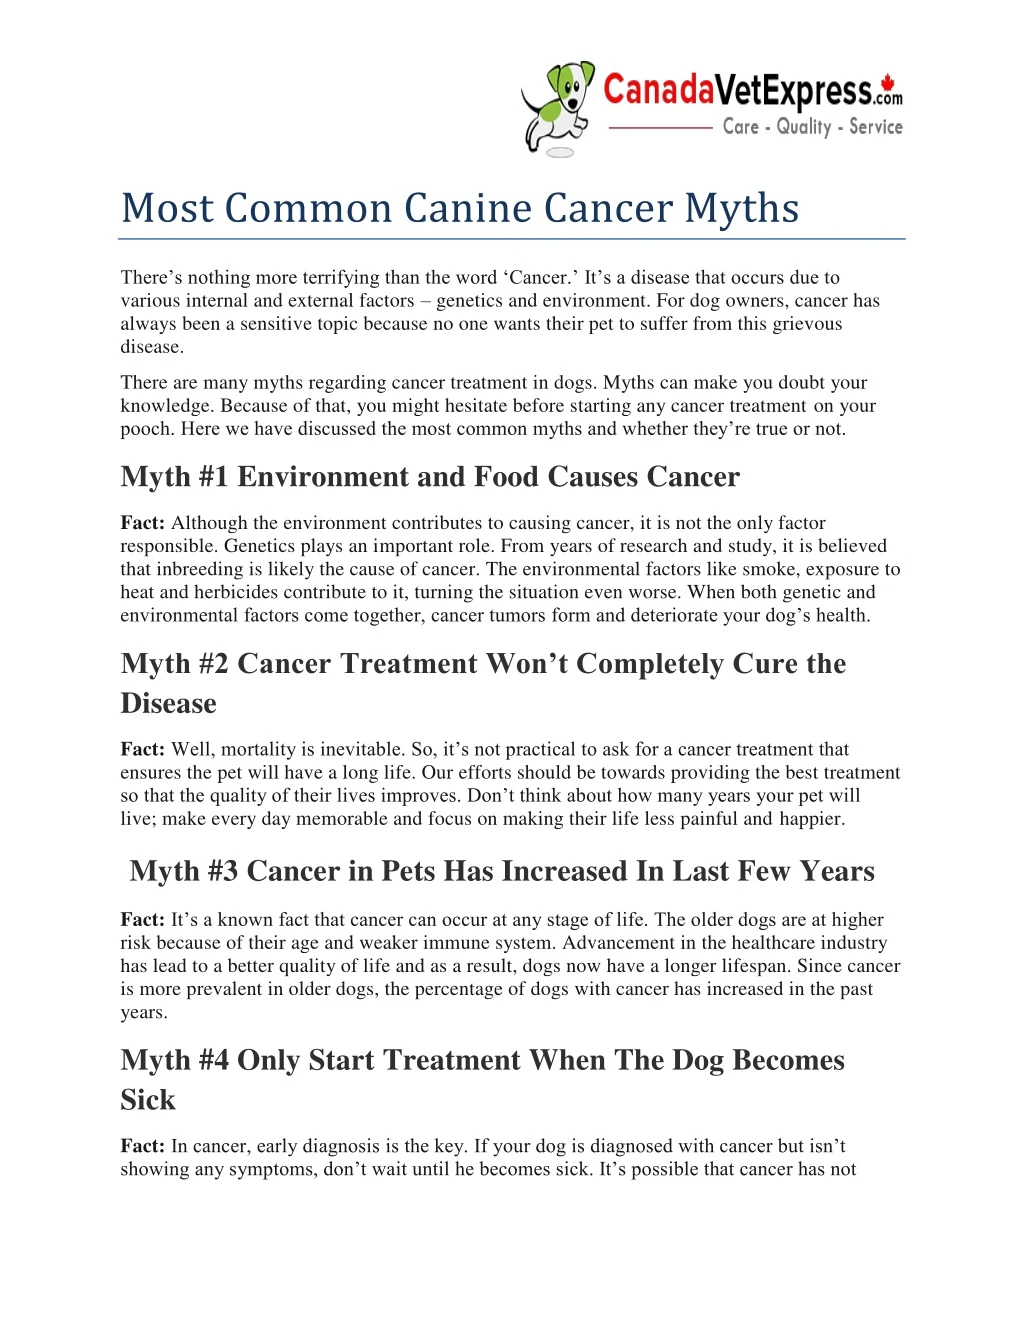 most common canine cancer myths